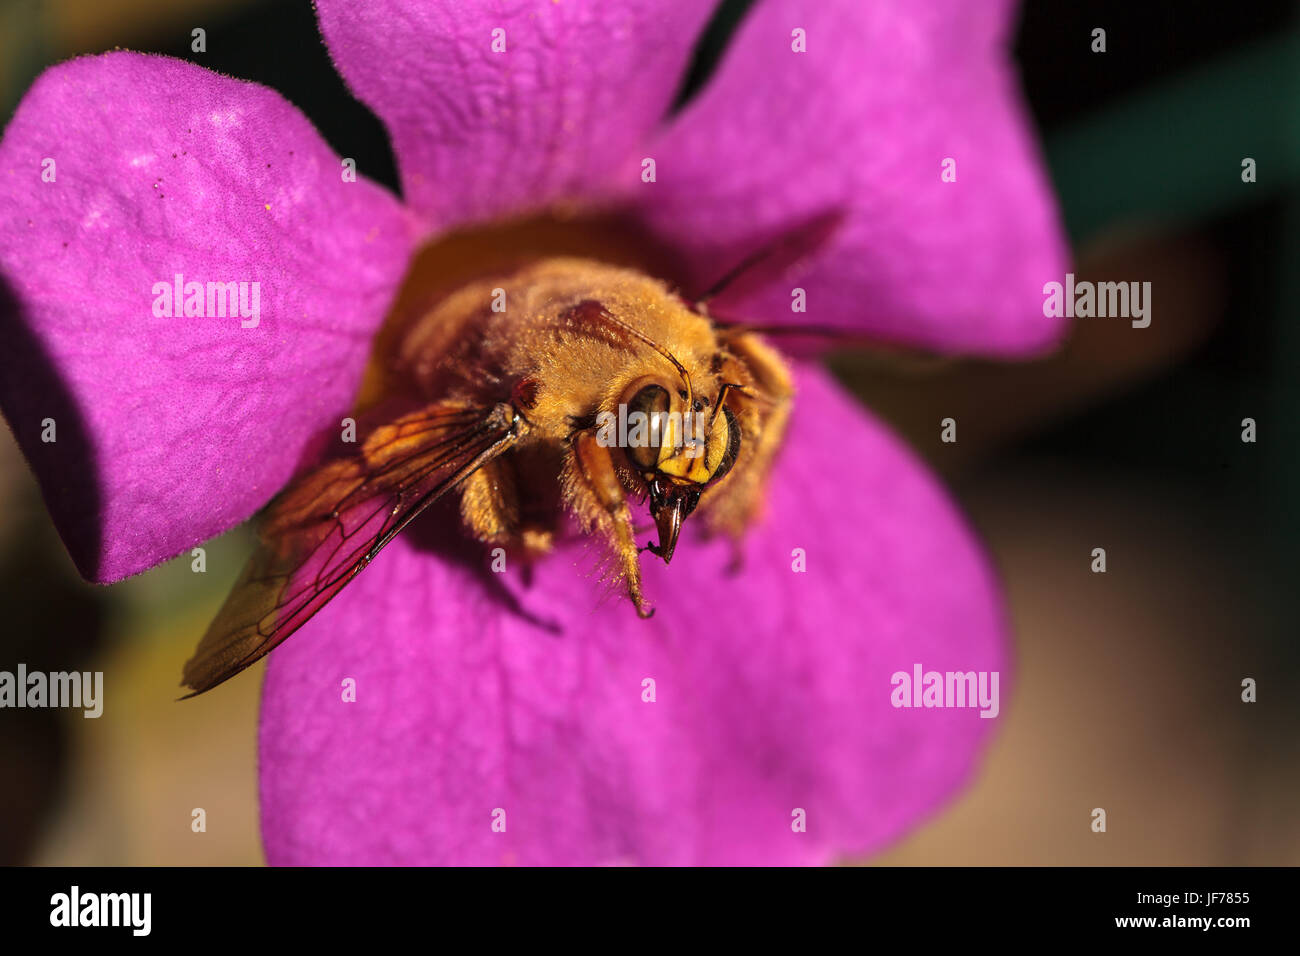 Gold colored male valley carpenter bee Stock Photo